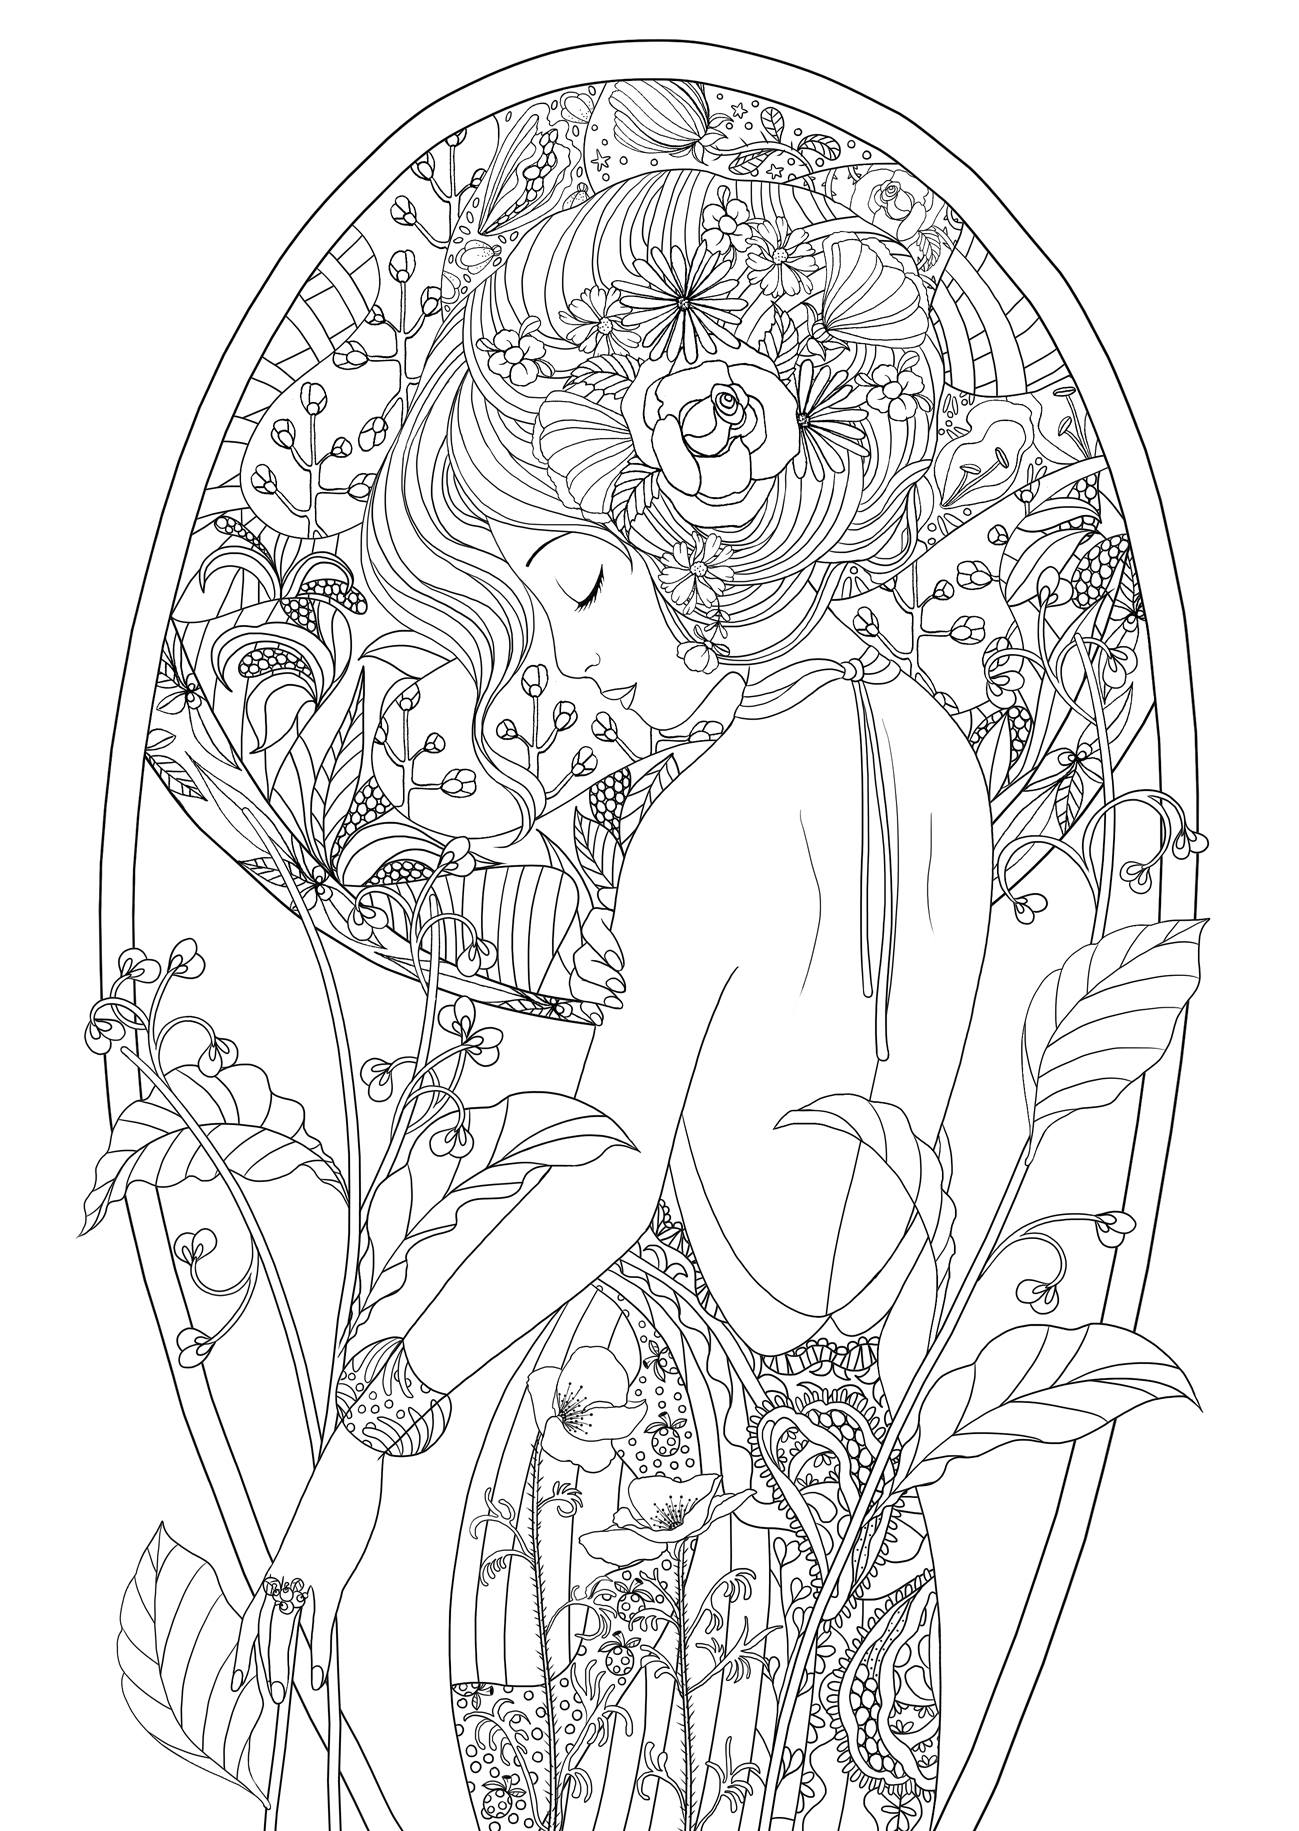 Makeup Coloring Pages For Adults : Free Printable Adult Coloring Pages